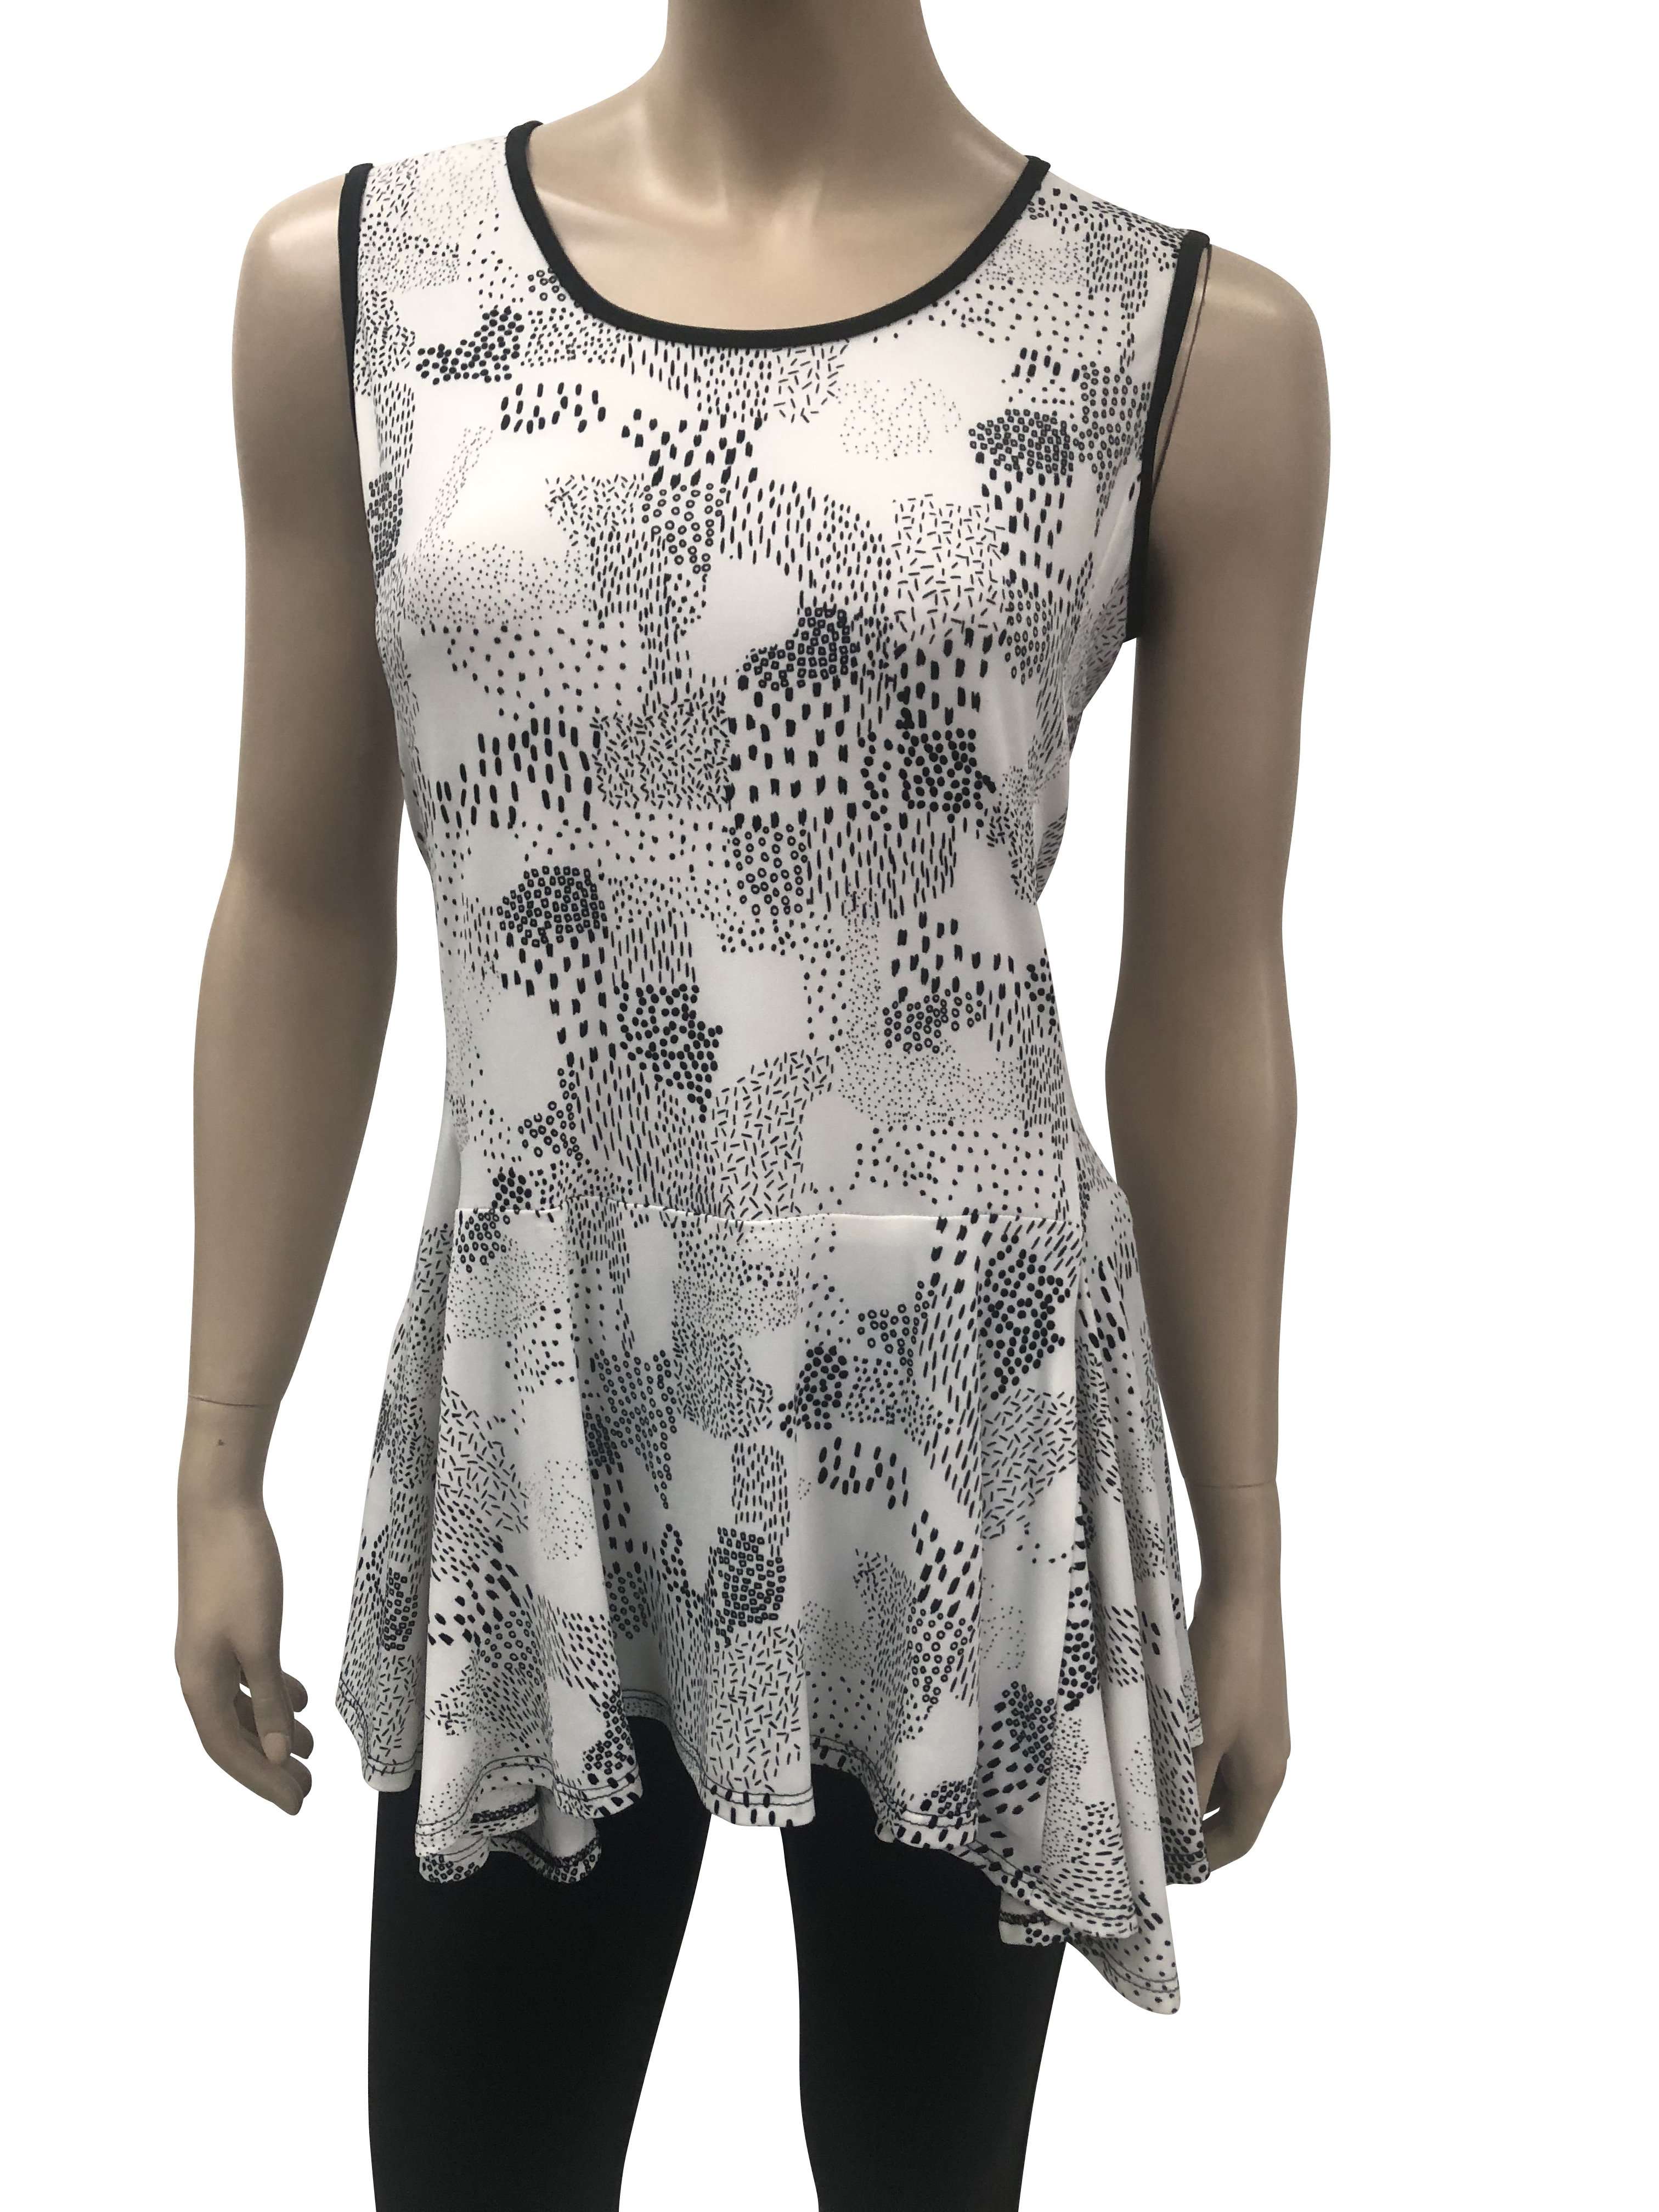 Women's Tops On Sale Canada Black and White Flattering Comfort Top Now 50 Off Made in Canada - Yvonne Marie - Yvonne Marie